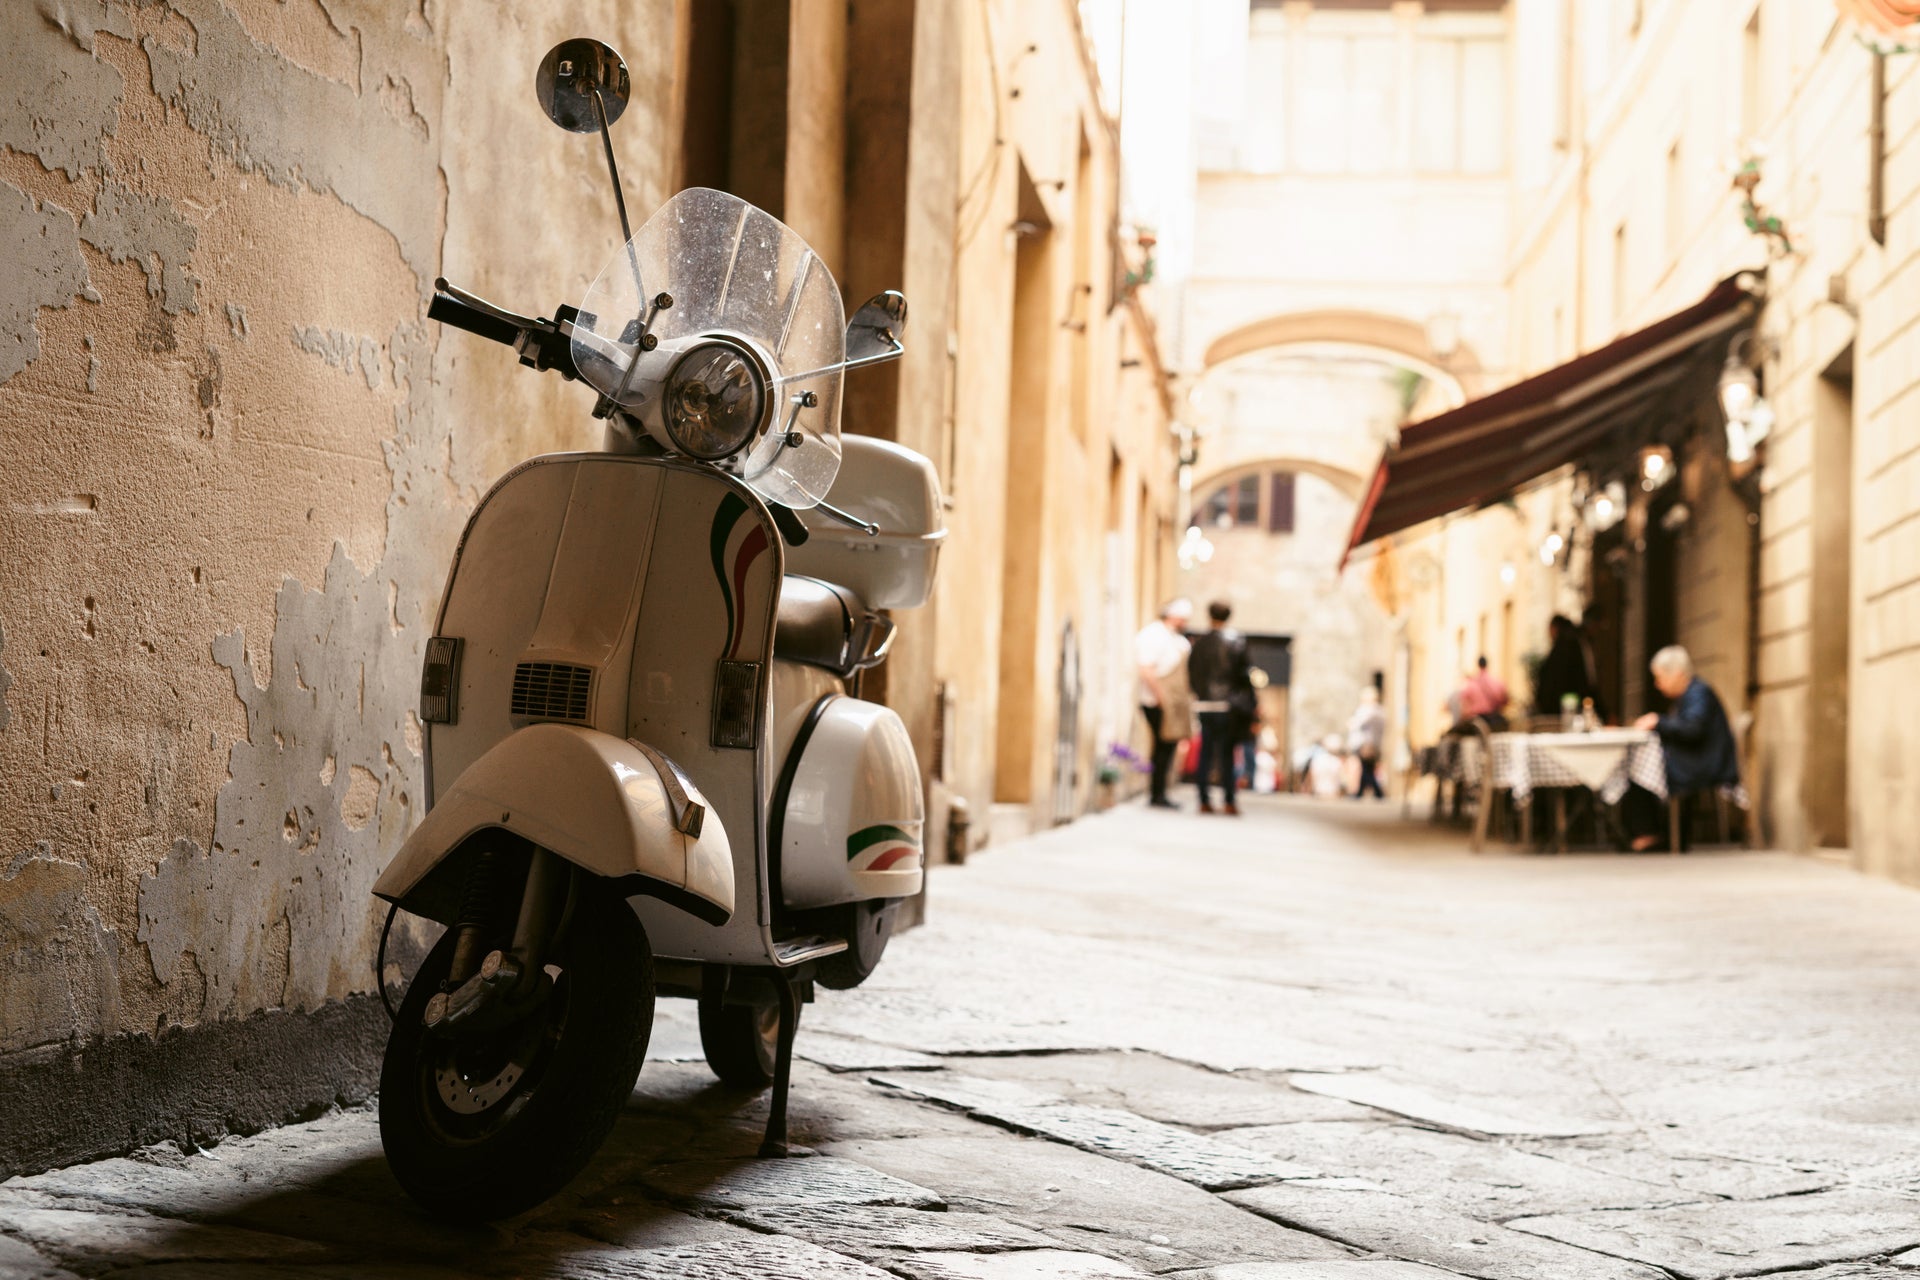 Electric Vespa Rental with Audio Guide